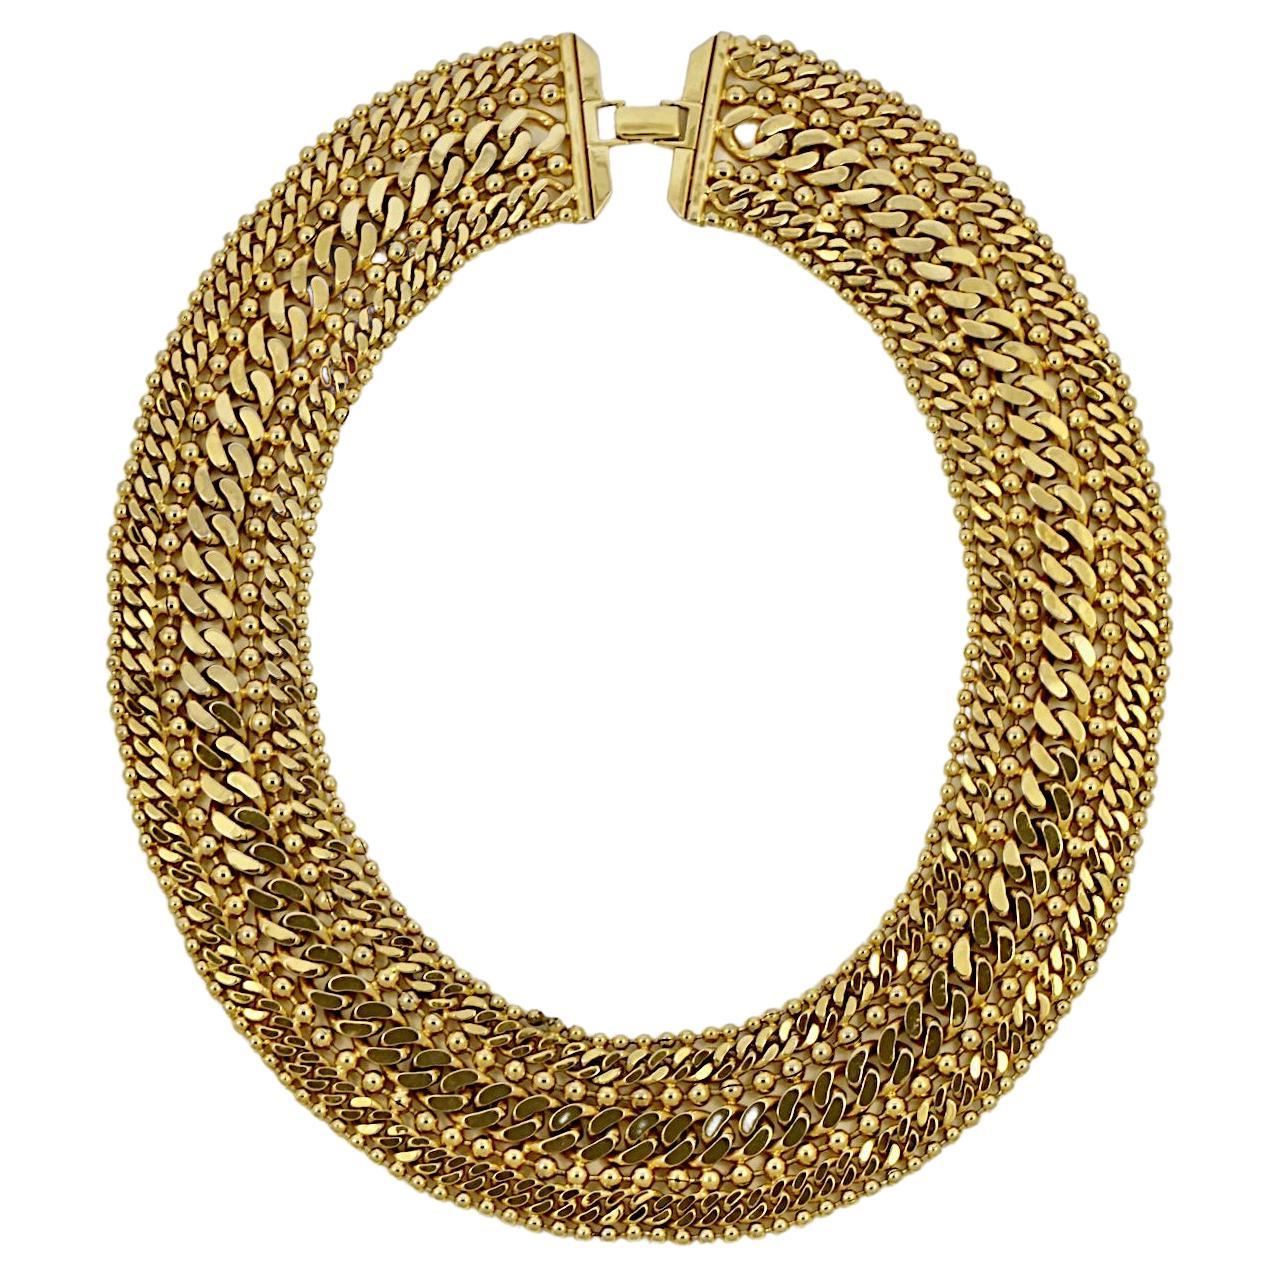 Monet Gold Plated Curb and Ball Link Chain Collar Necklace circa 1980s